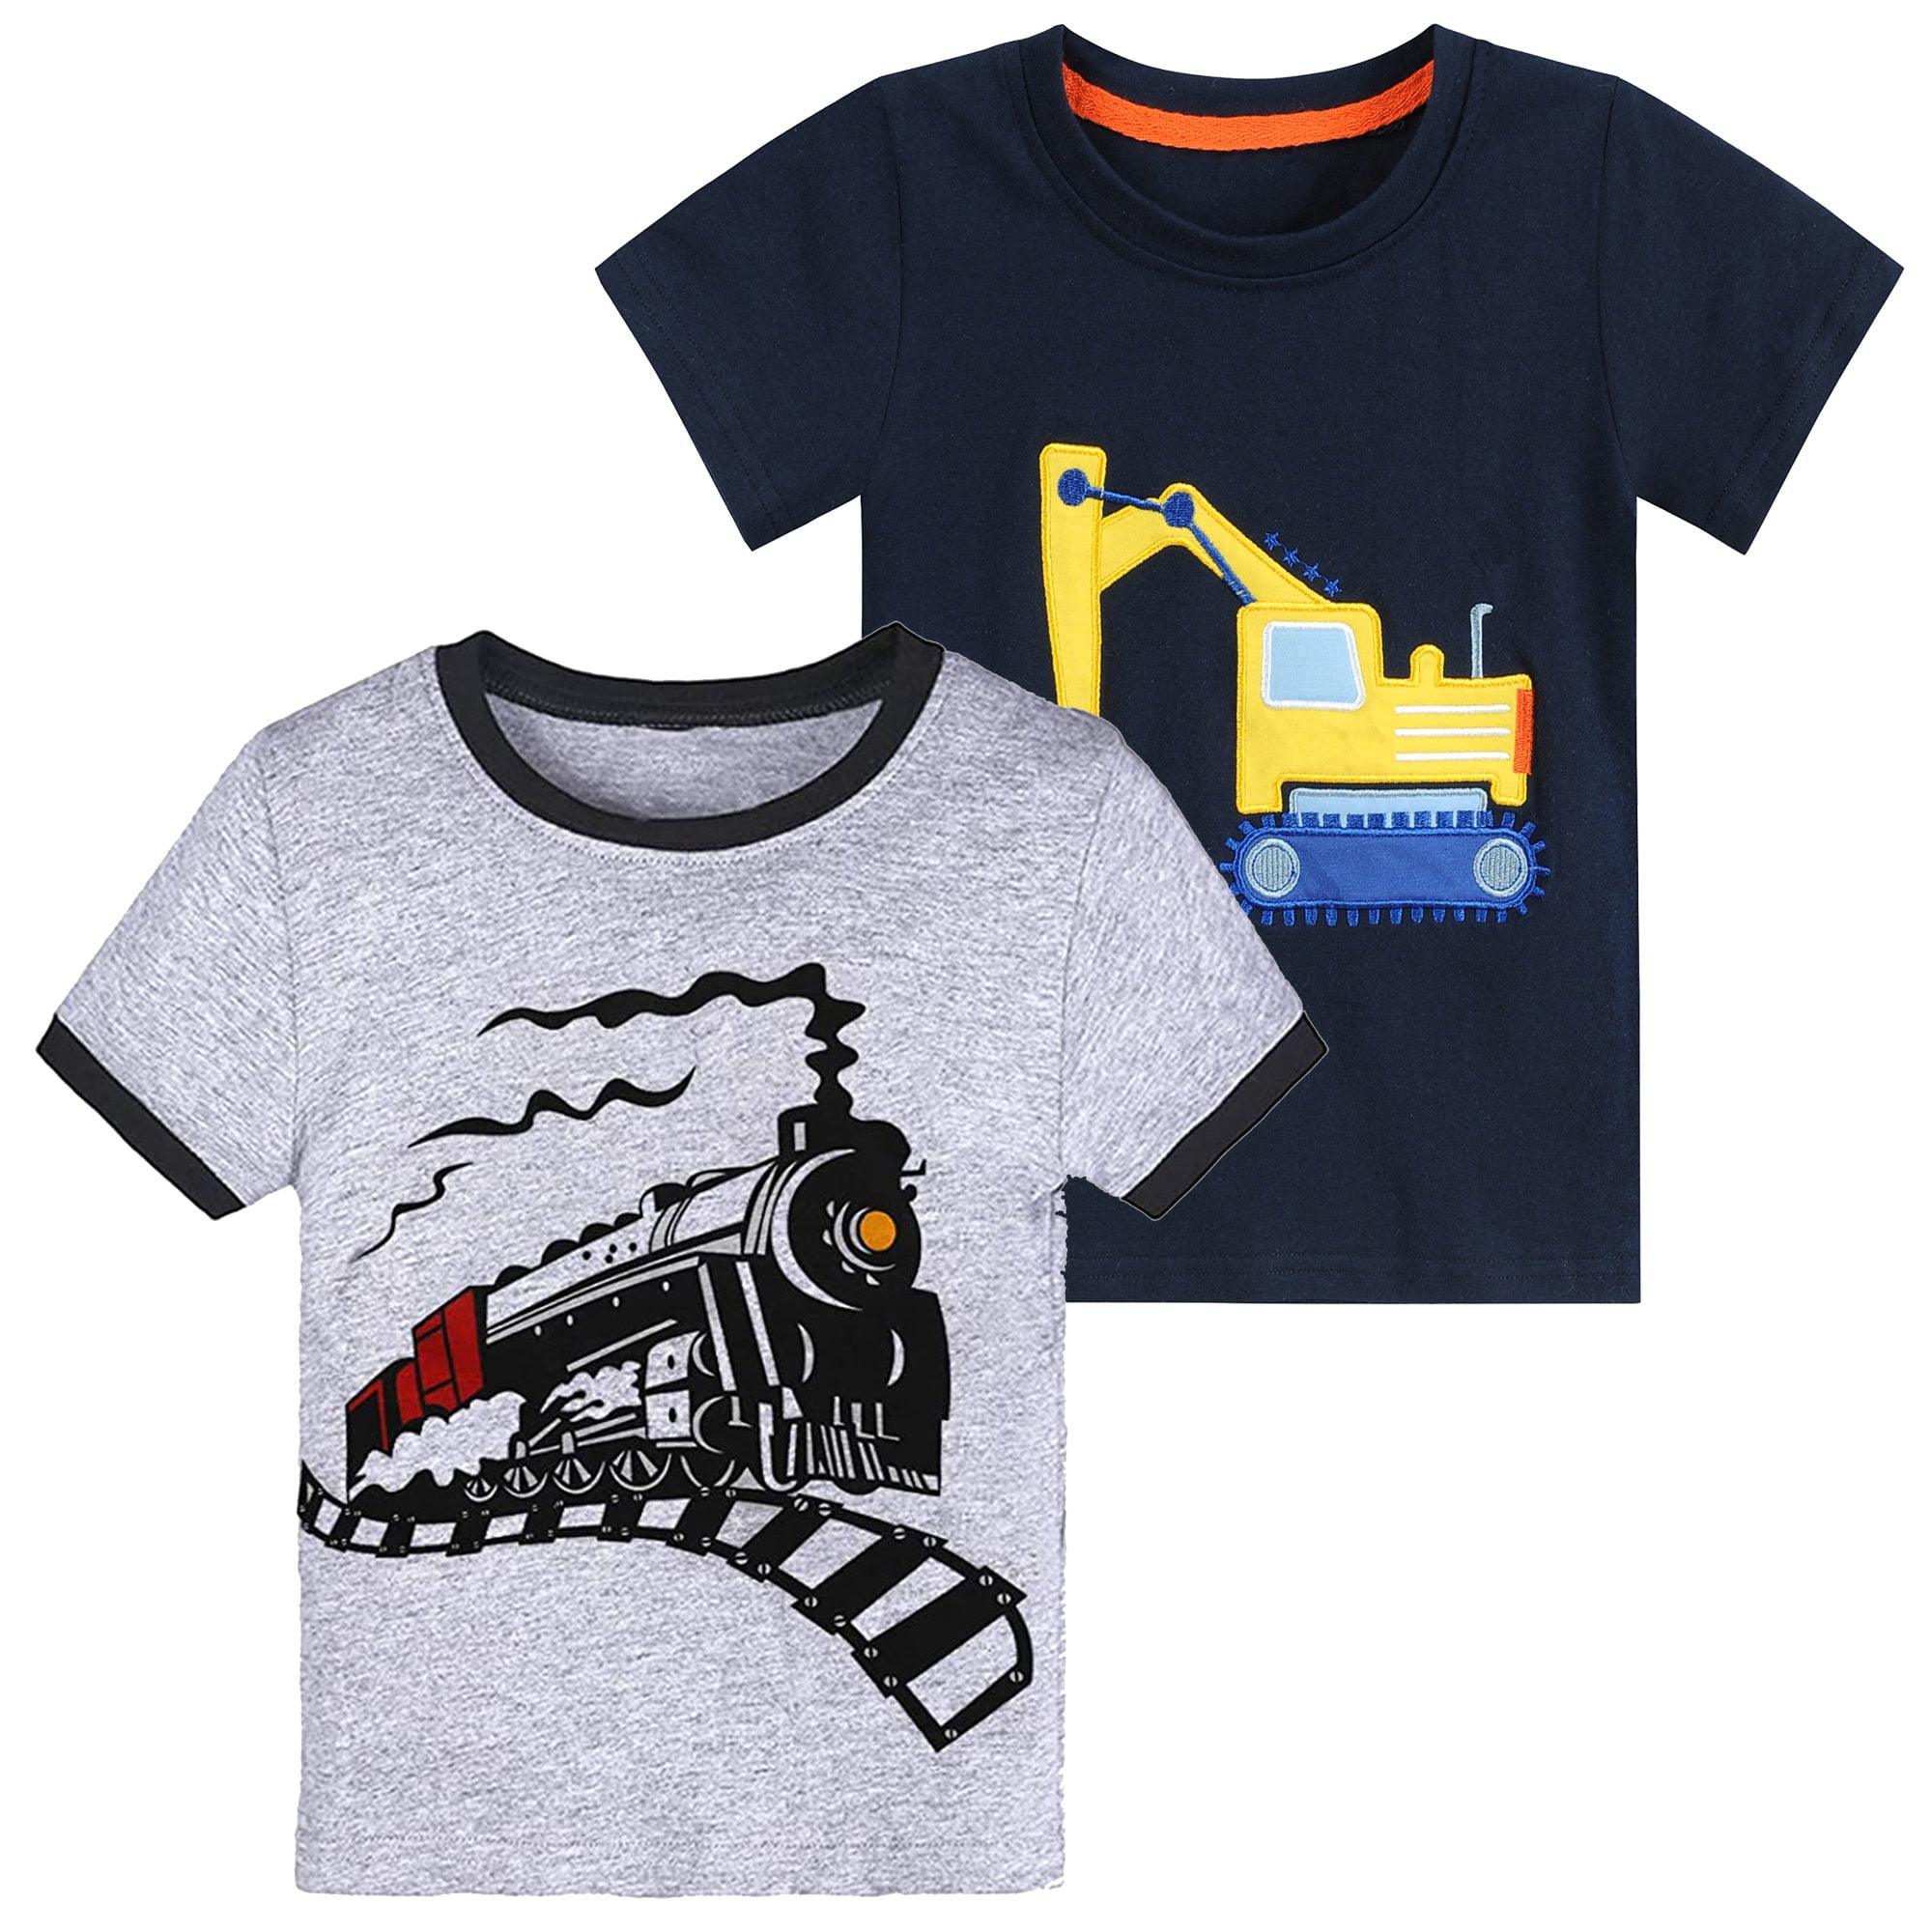 Dint 2023 New Fashion Boys T-shirt Summer Shark Cotton Causal Clothes Lovely Tops For Kids 2-7 Year 7T